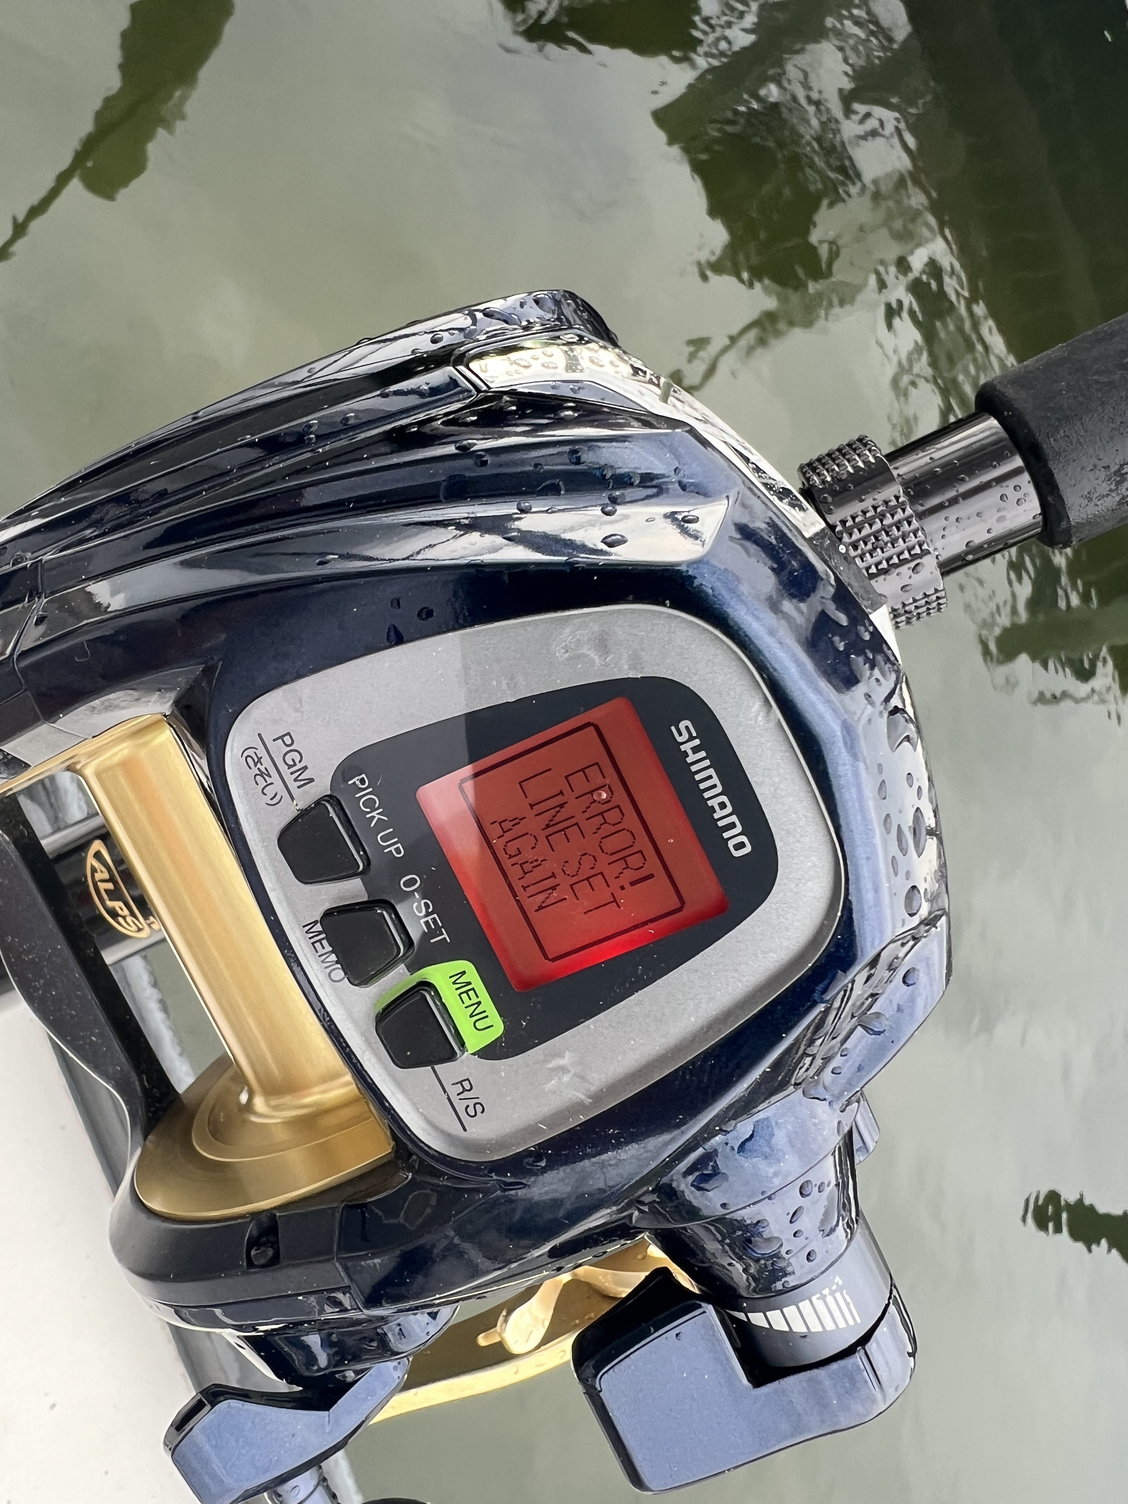 Error message spoiling shimano beastmaster 9000 - The Hull Truth